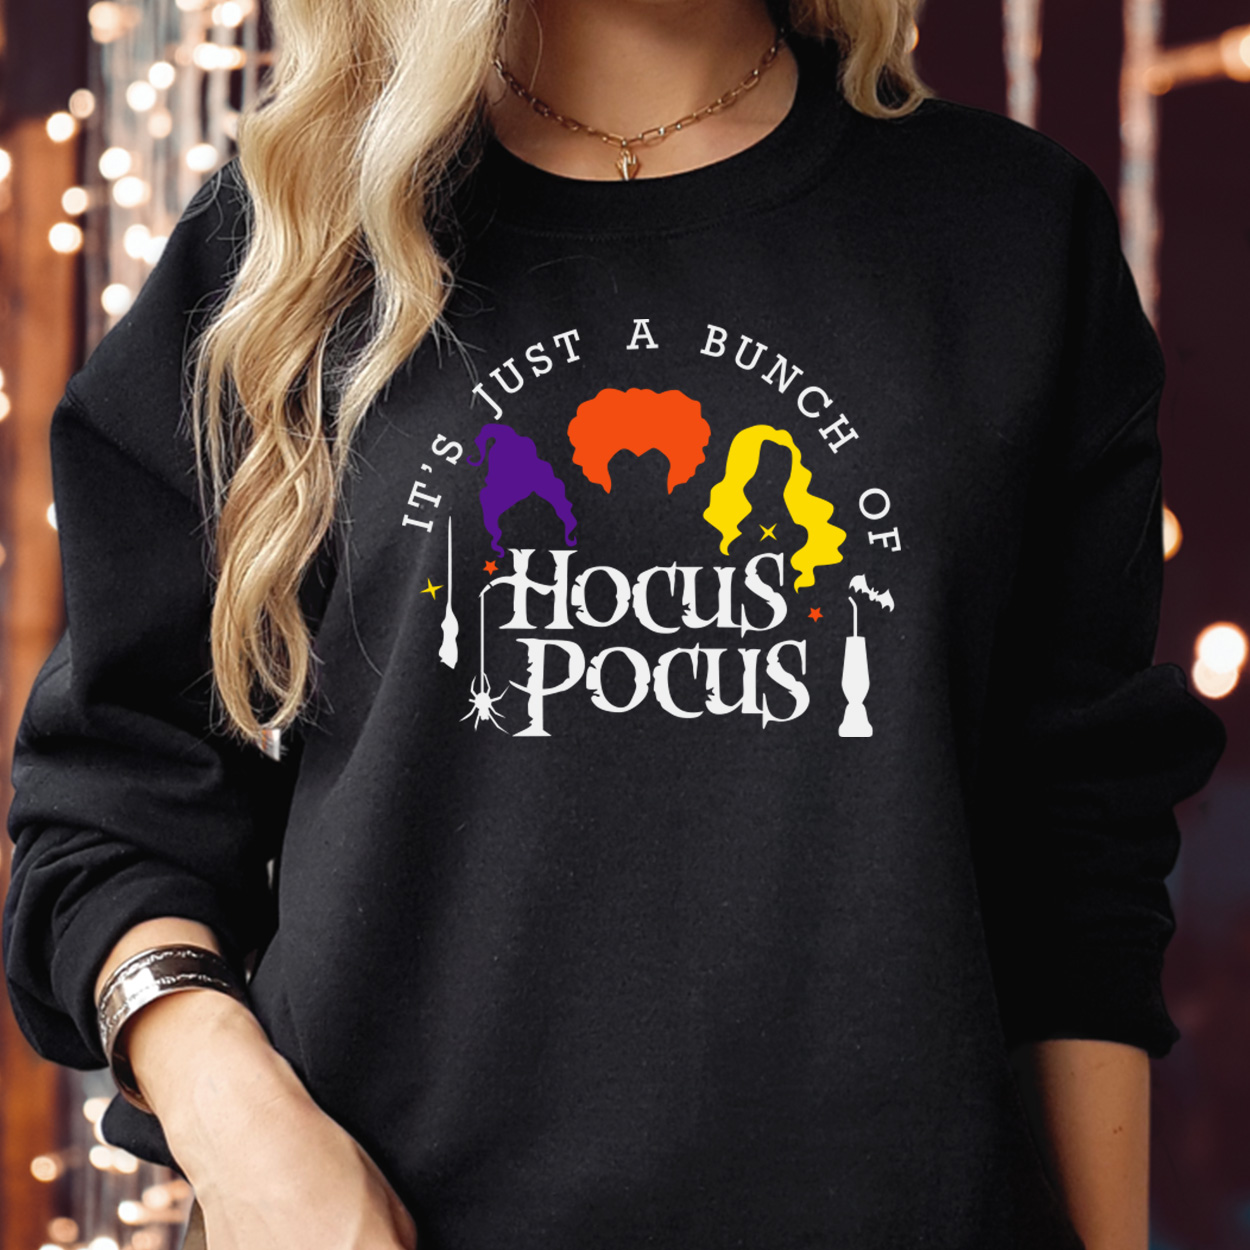 SWEATSHIRT (1785) It's Just a Bunch Of Hocus Pocus Sanderson Sisters Witches